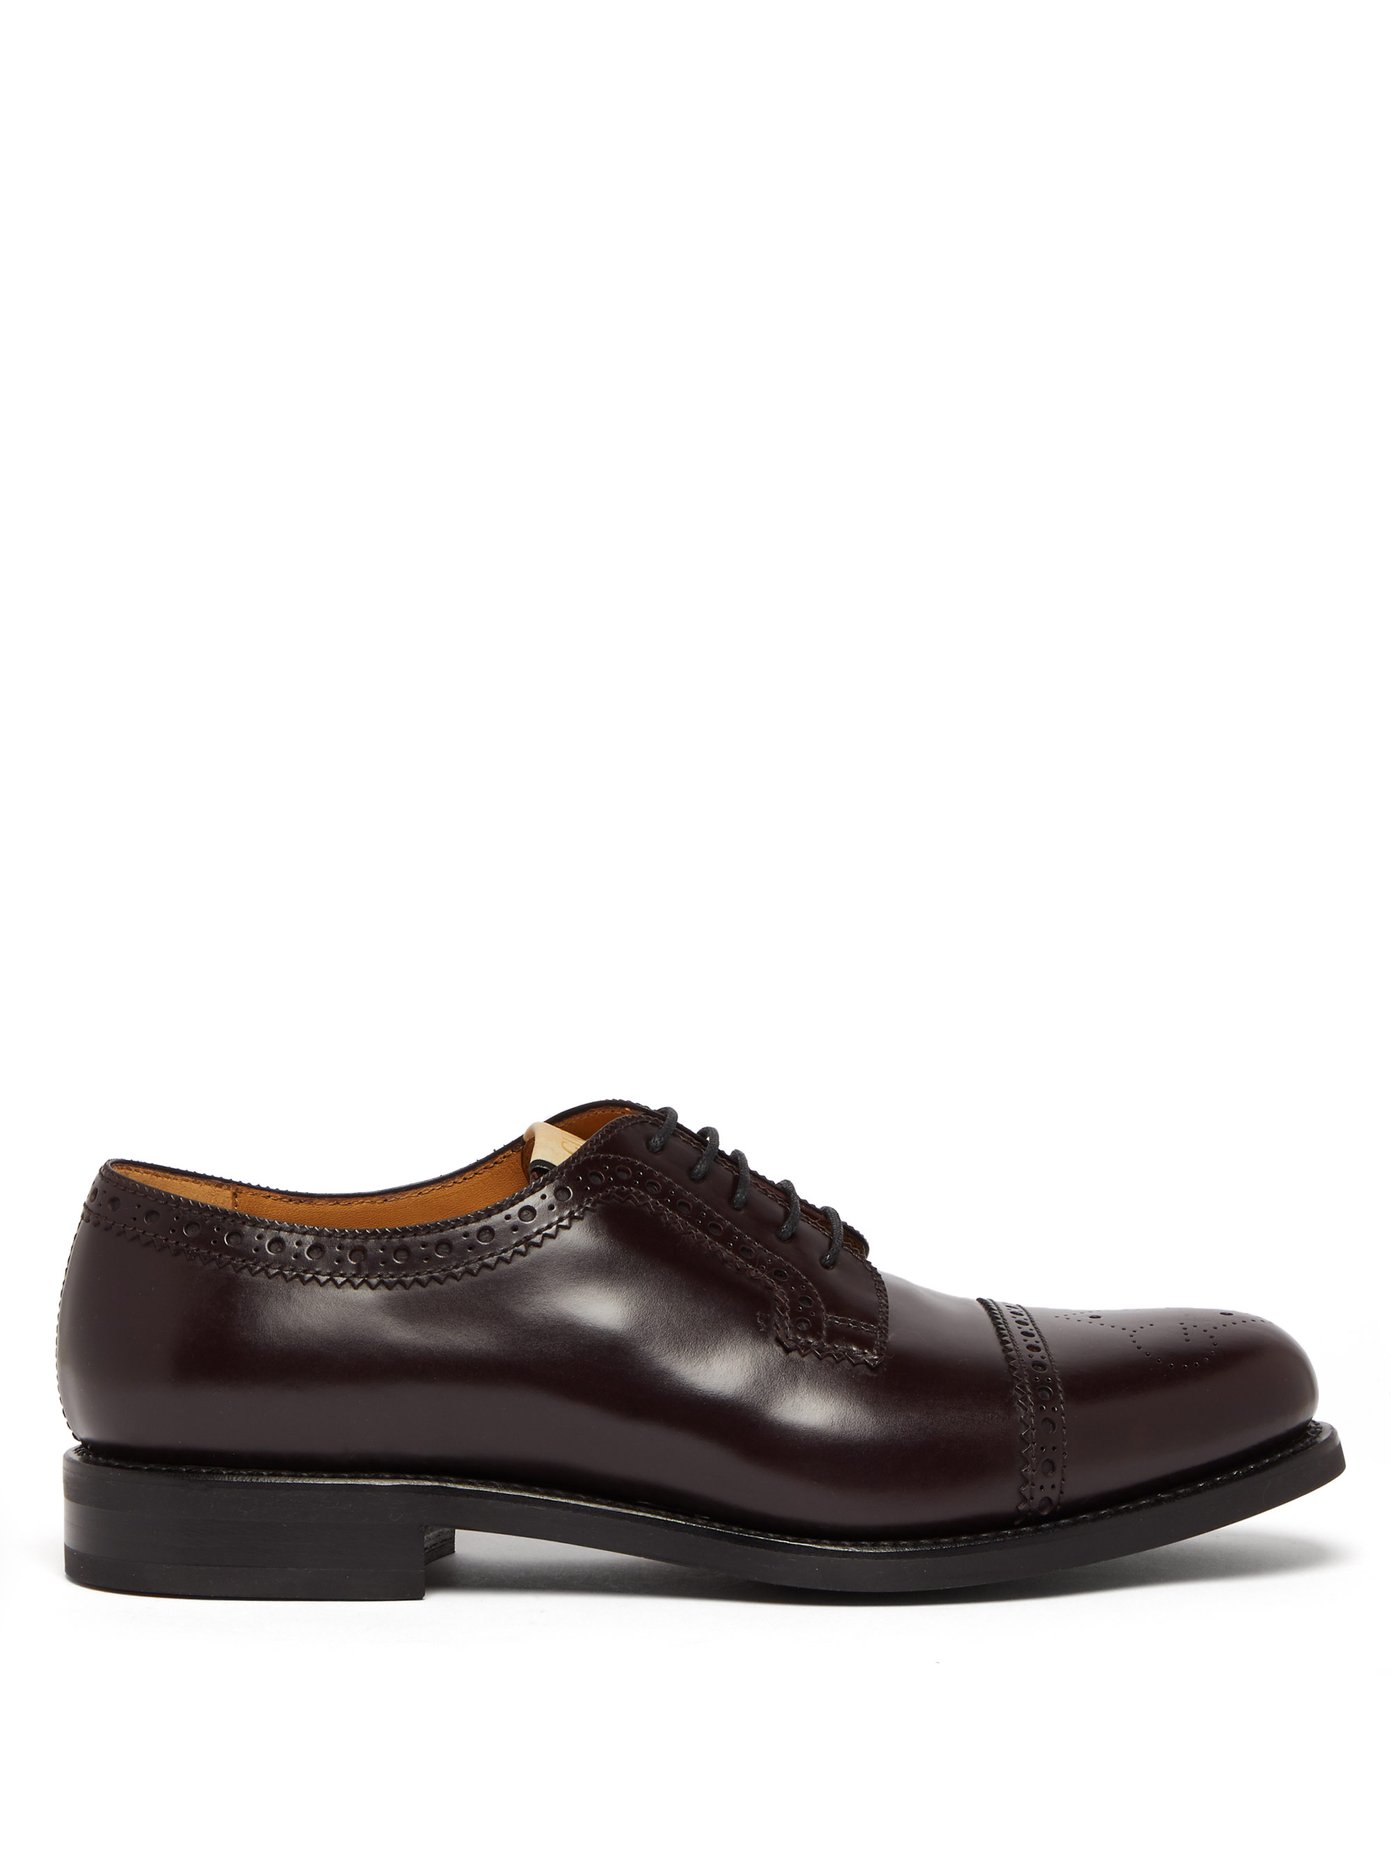 GG-perforated leather brogues | Gucci 